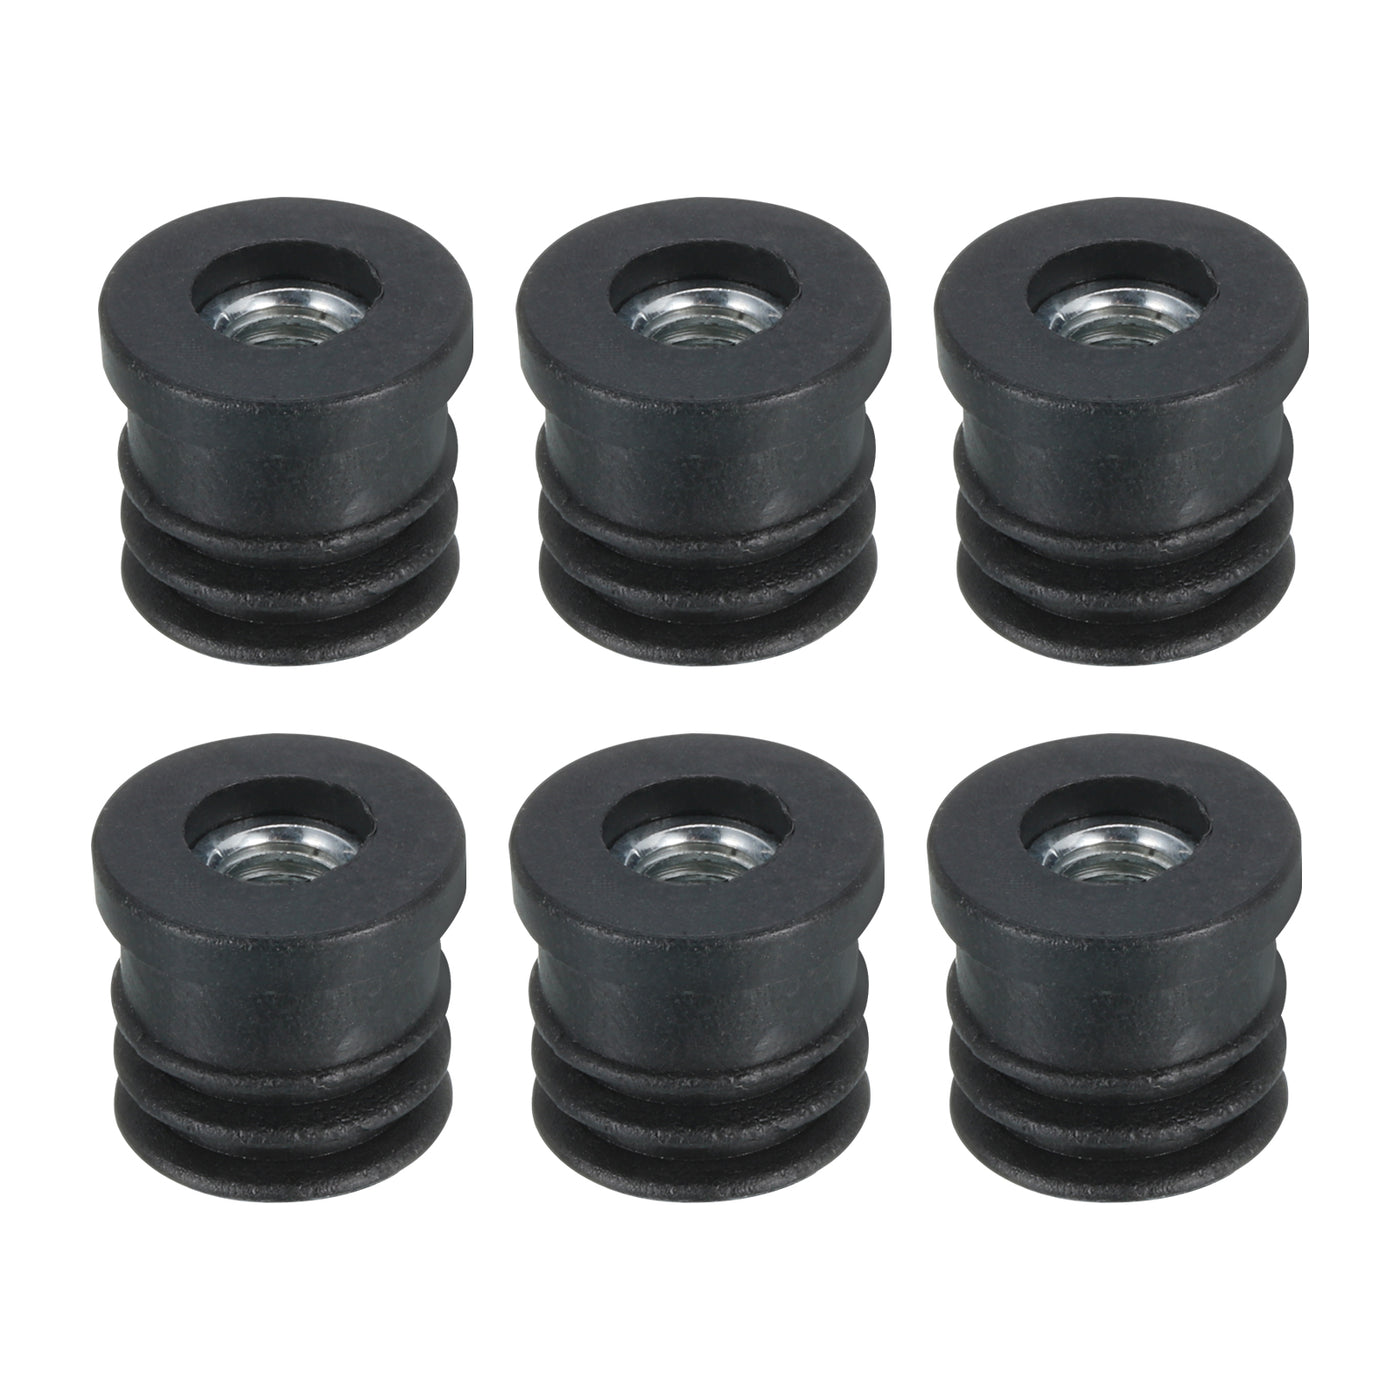 uxcell Uxcell 6Pcs Caster Insert with Thread, 16mm/0.63" M6 Thread for Furniture